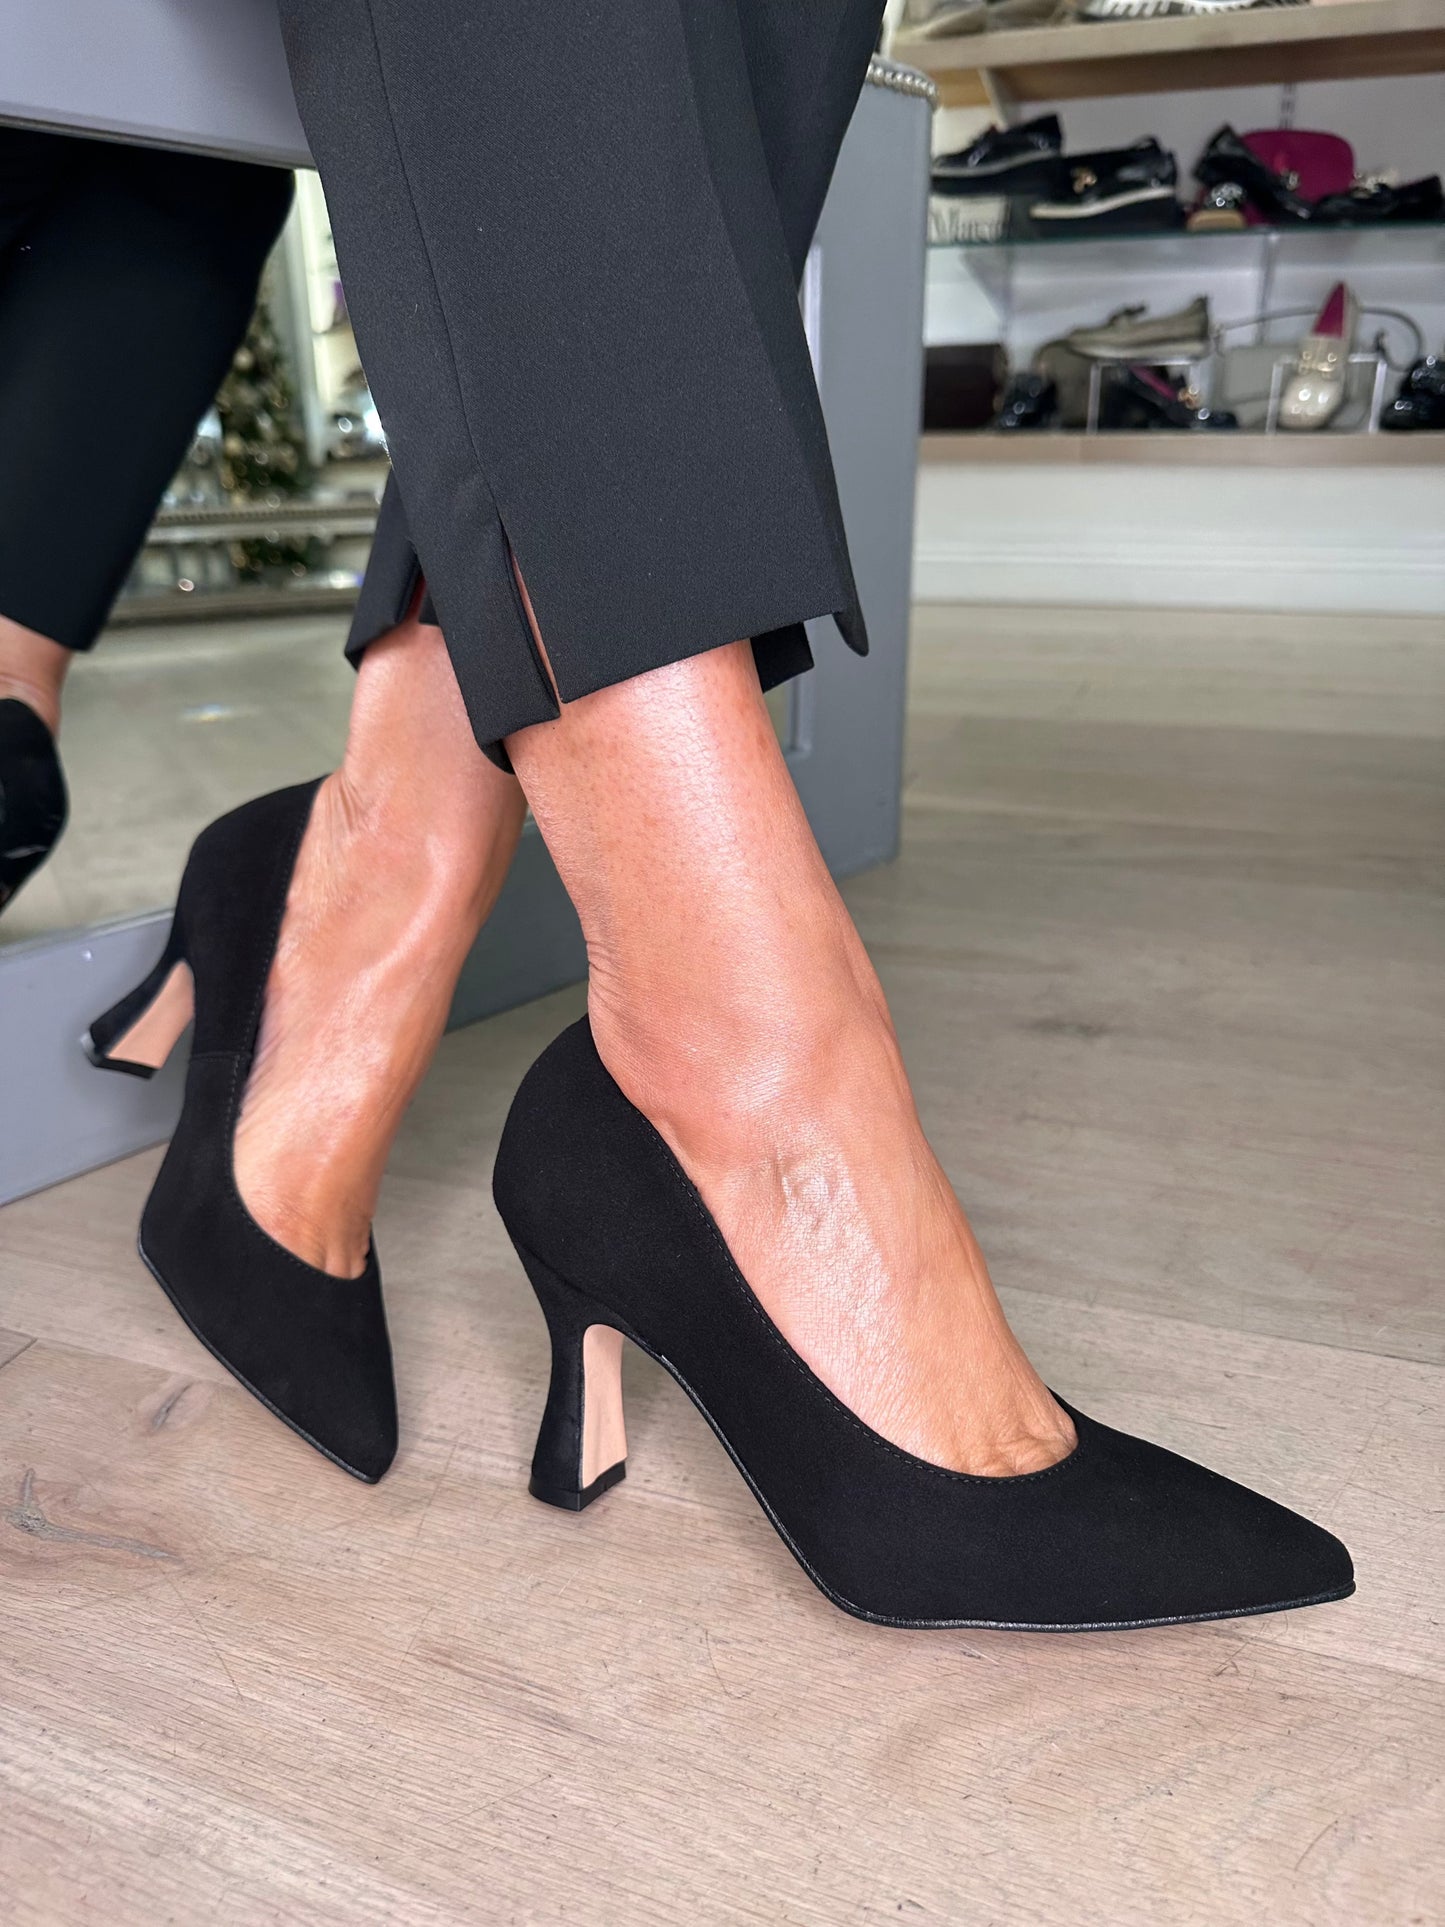 Dchicas (By Vigeura) -Black Suede Pointy Toe Mid Heel Court Shoe